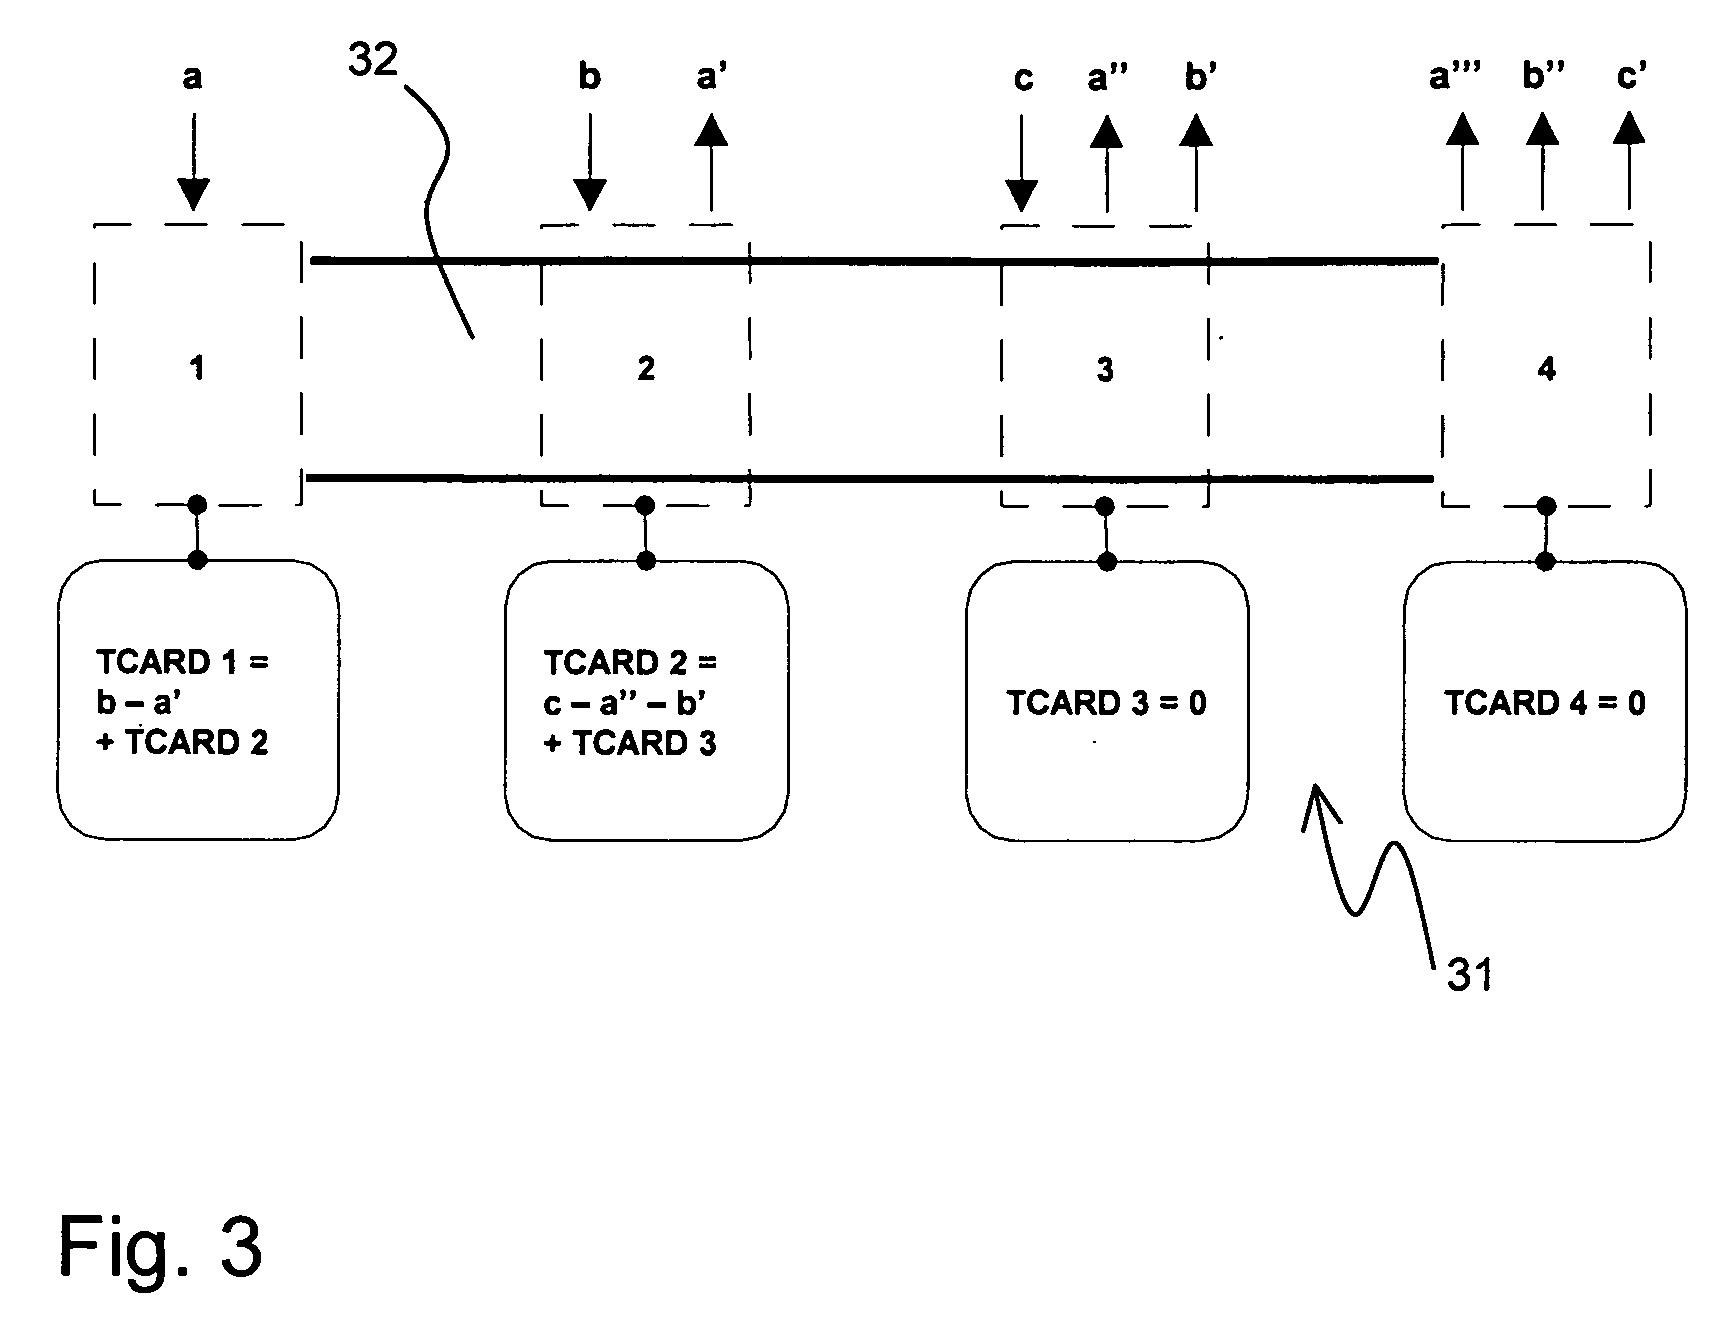 Method for operating a packet based data network